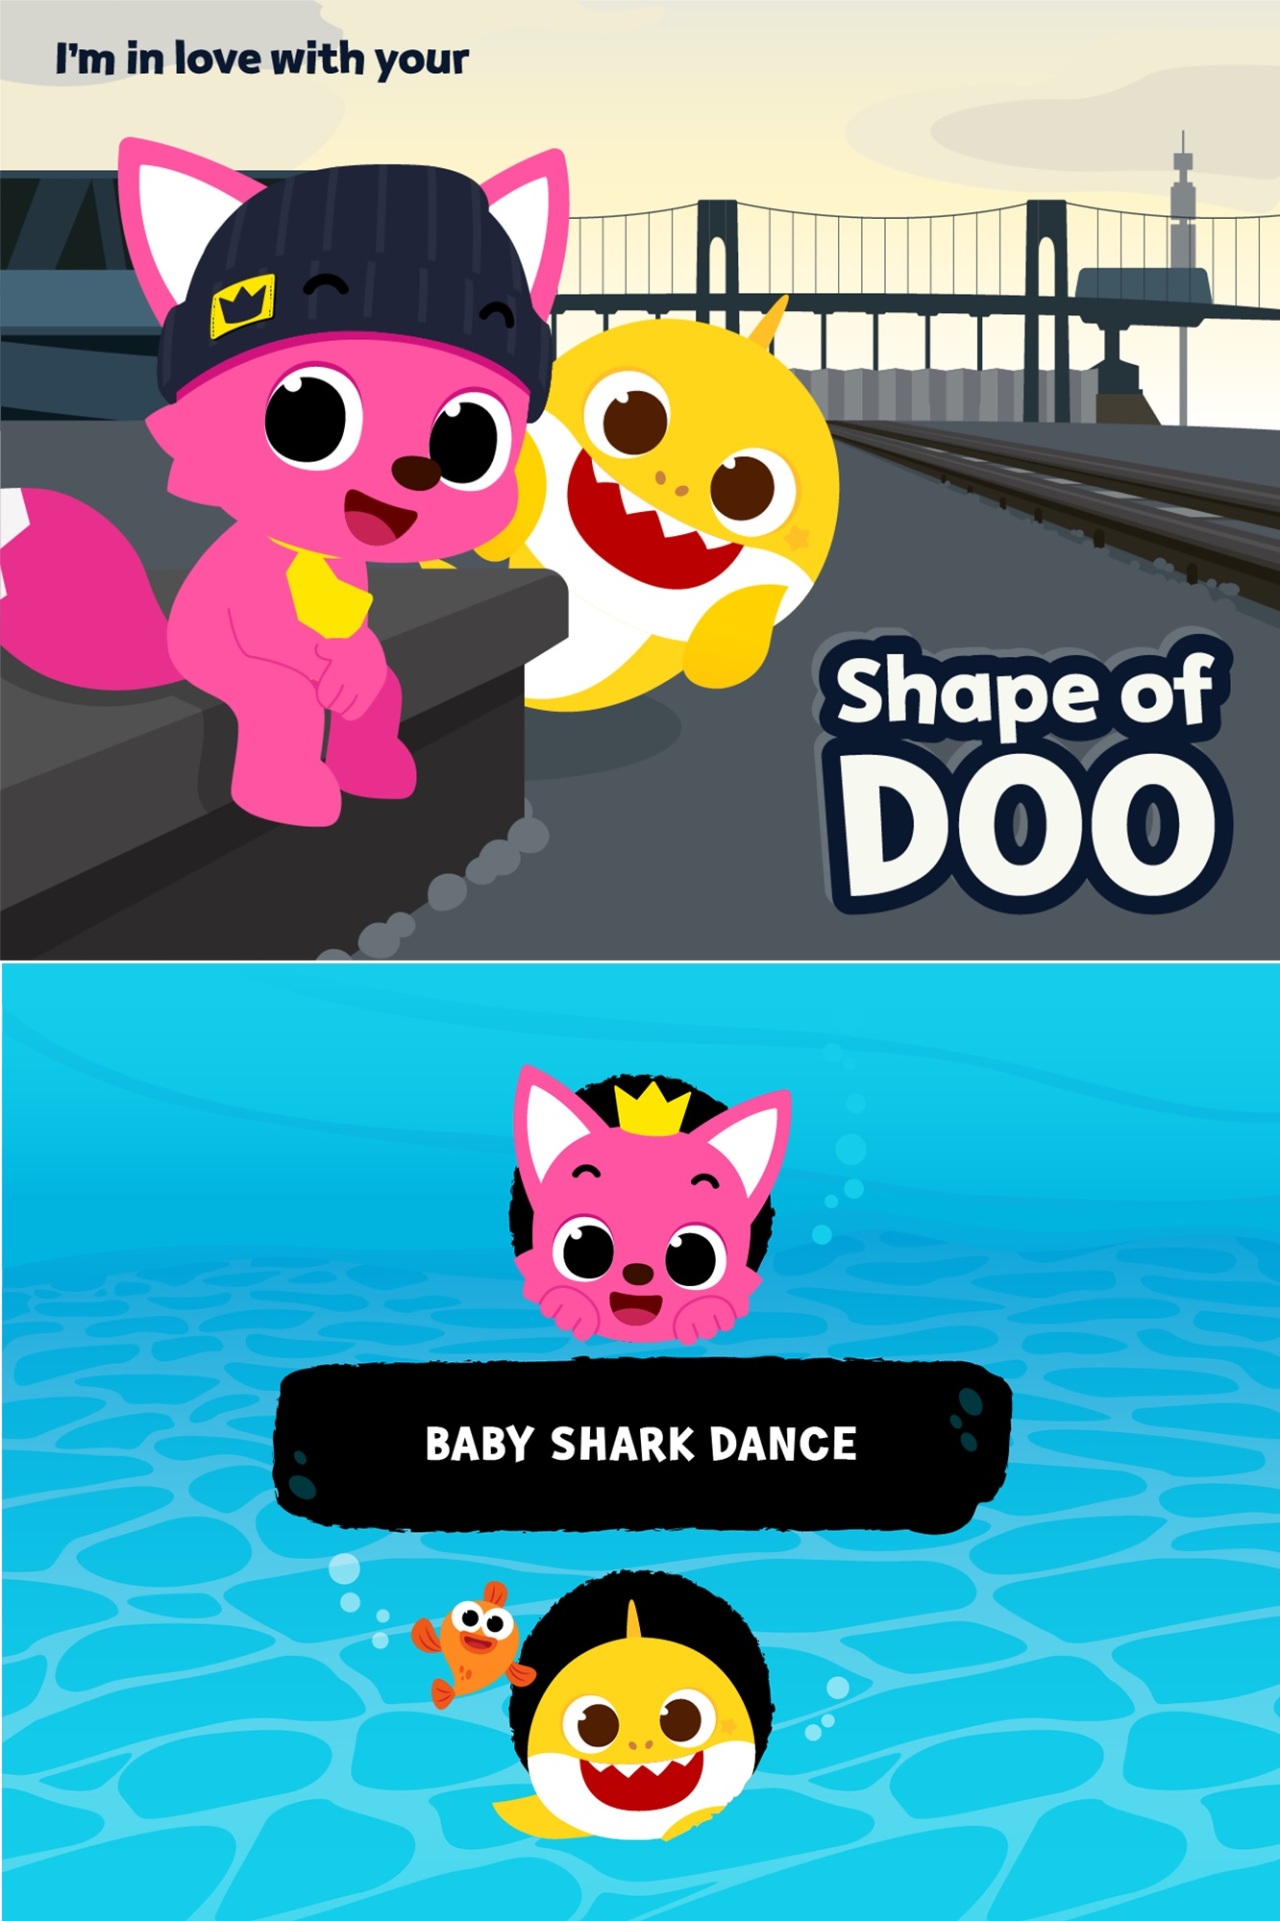 Download Baby Shark Dance babyshark Most Viewed Video Animal Songs PINKFONG Songs for Children Mp3 (0217 Min) - Free Music MP3 Downloader